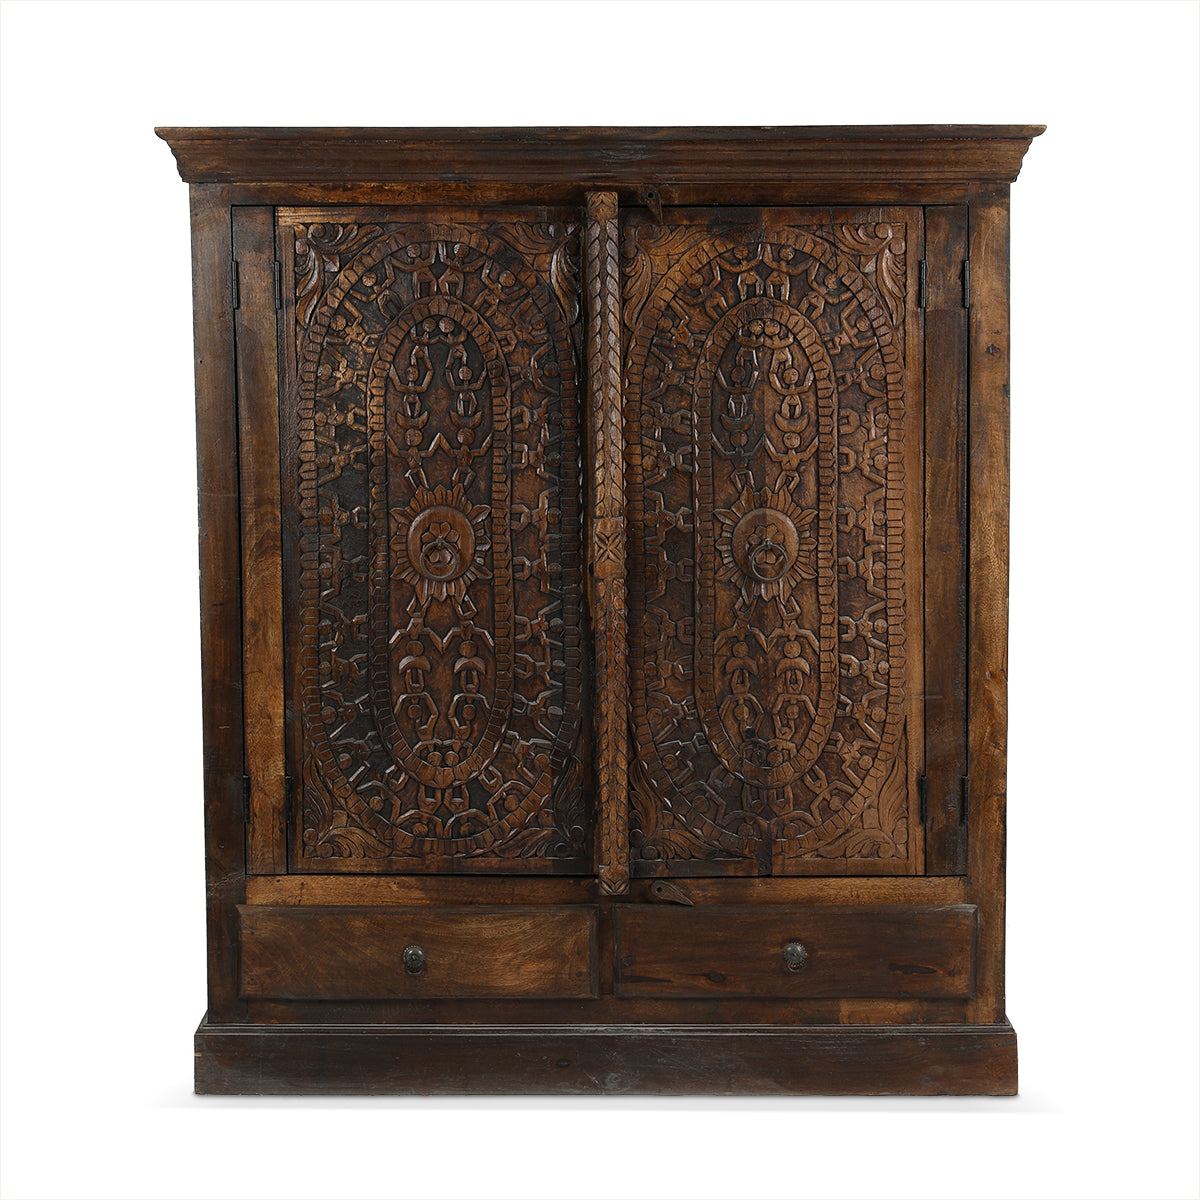 Antique Hand-Carved Wooden Cabinet